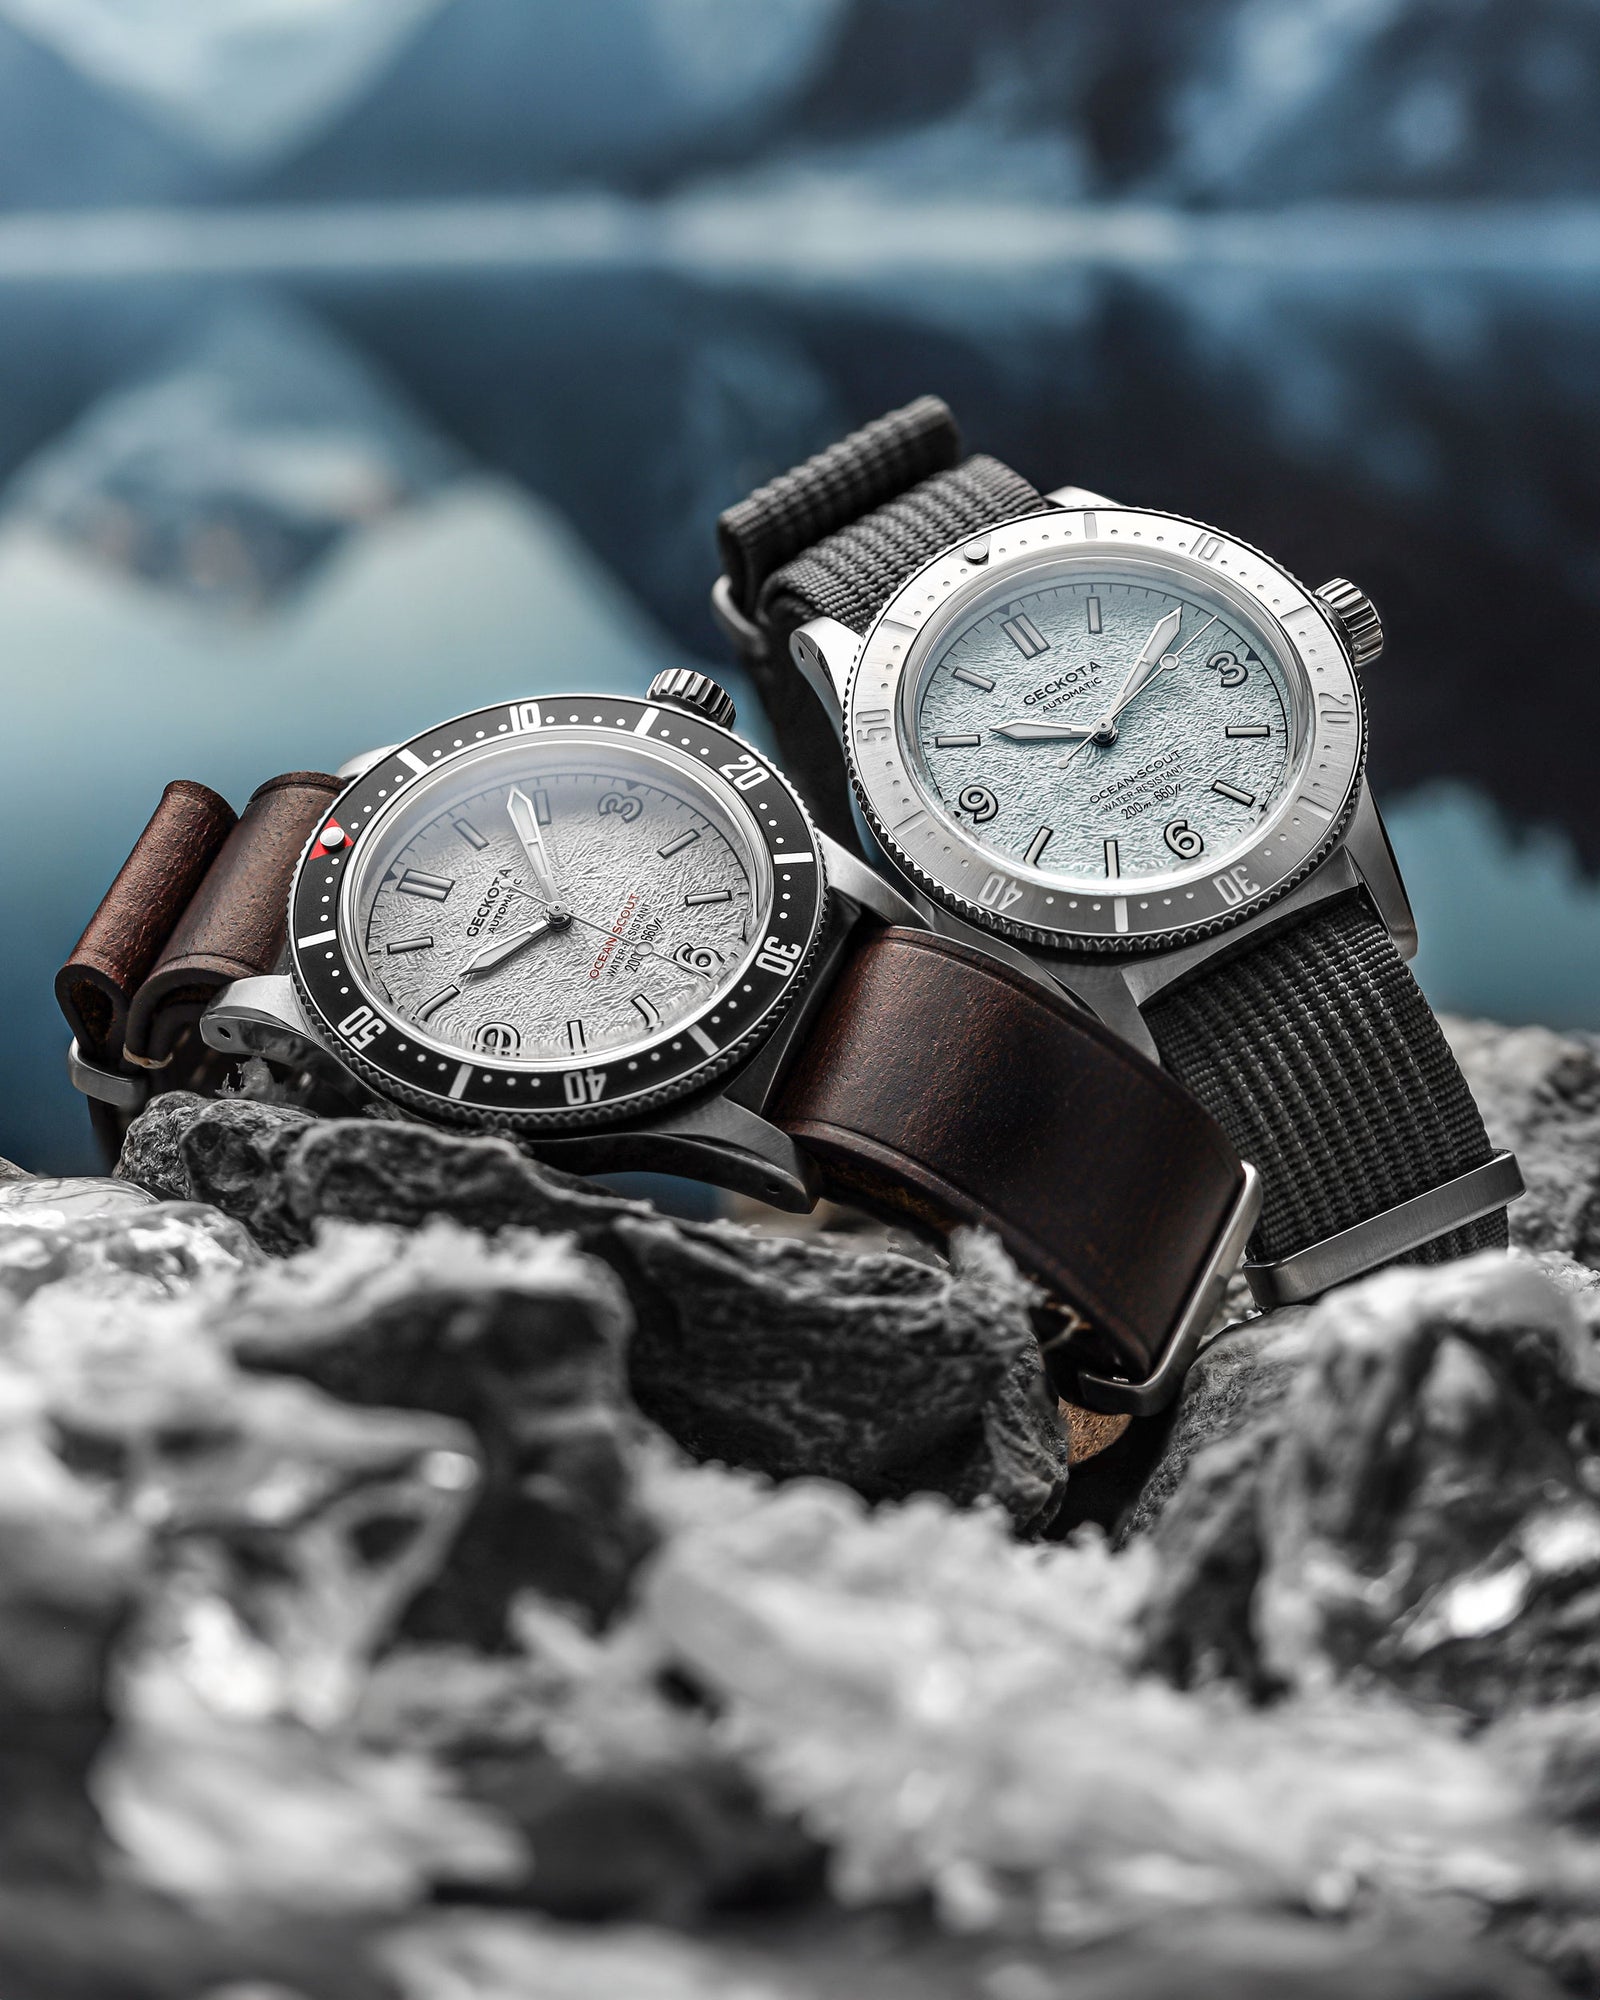 High Quality Watches and Replacement Watch Straps | Geckota